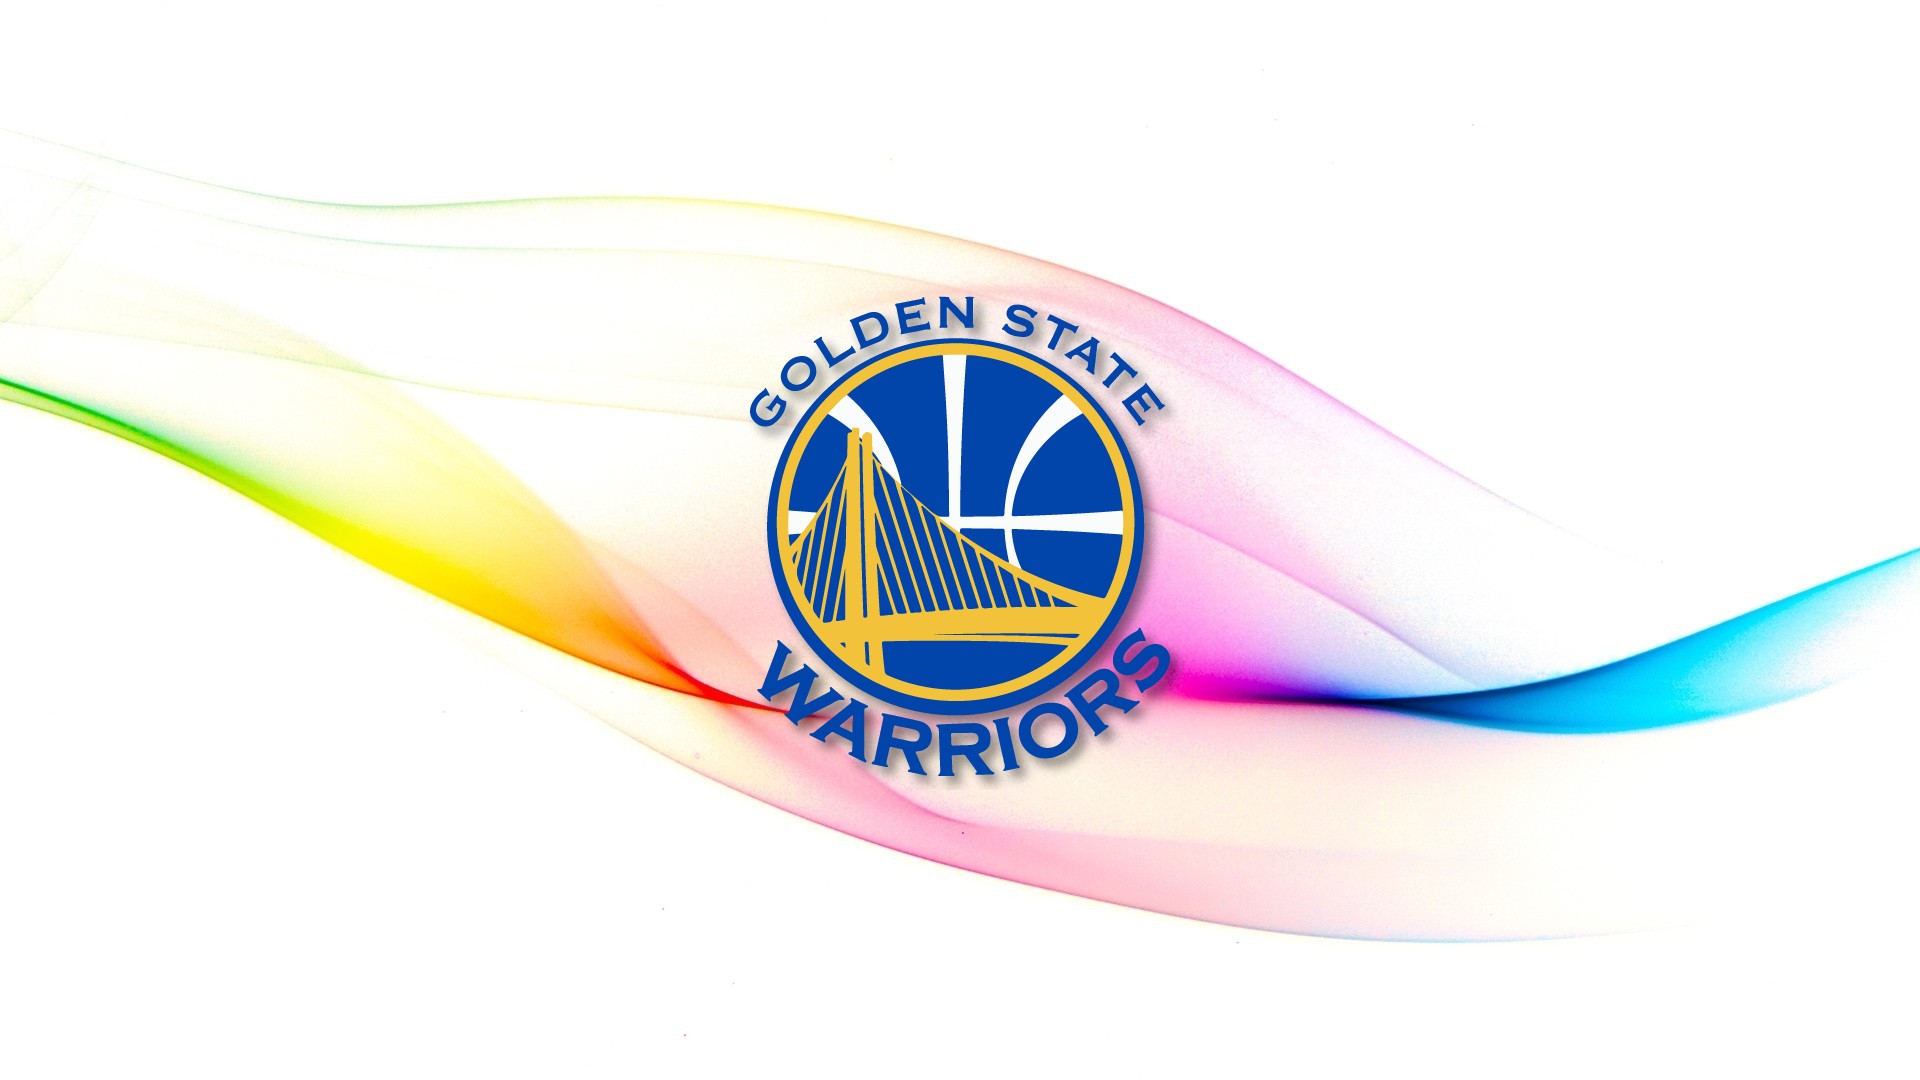 Golden State Warriors NBA Mac Backgrounds with image dimensions 1920x1080 pixel. You can make this wallpaper for your Desktop Computer Backgrounds, Windows or Mac Screensavers, iPhone Lock screen, Tablet or Android and another Mobile Phone device